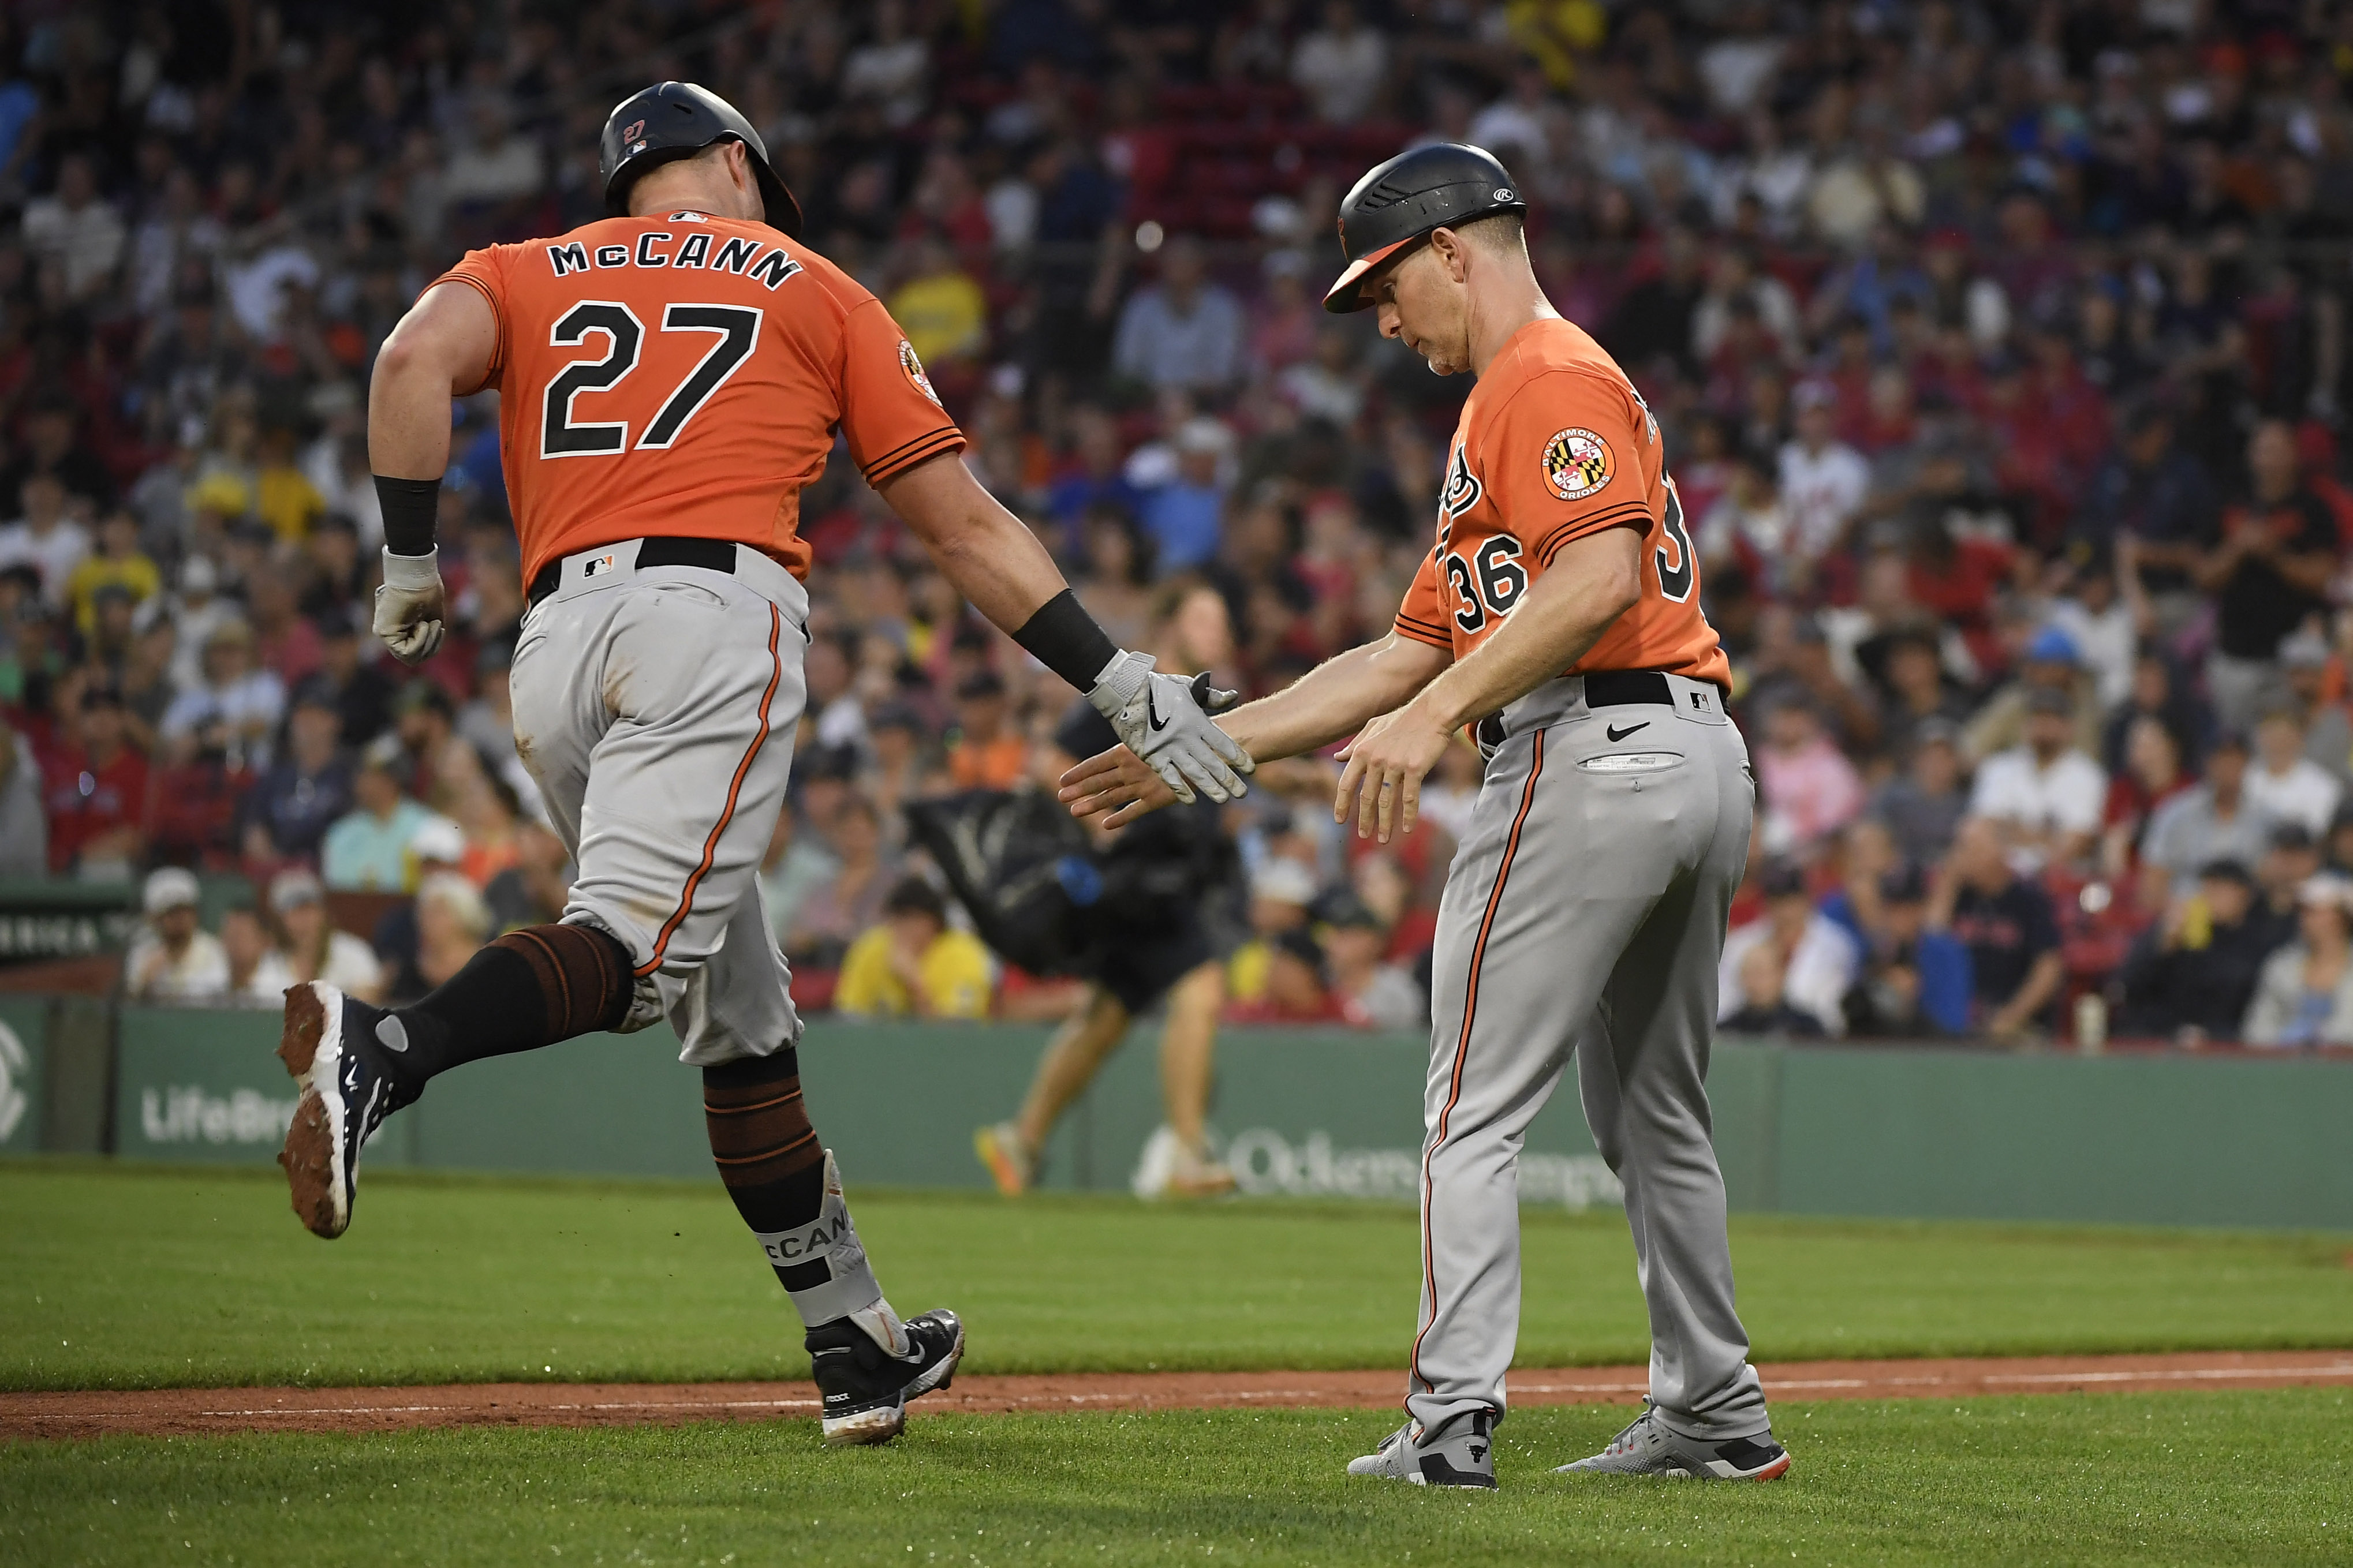 James McCann (2 HRs) powers Orioles past Red Sox for seventh straight win